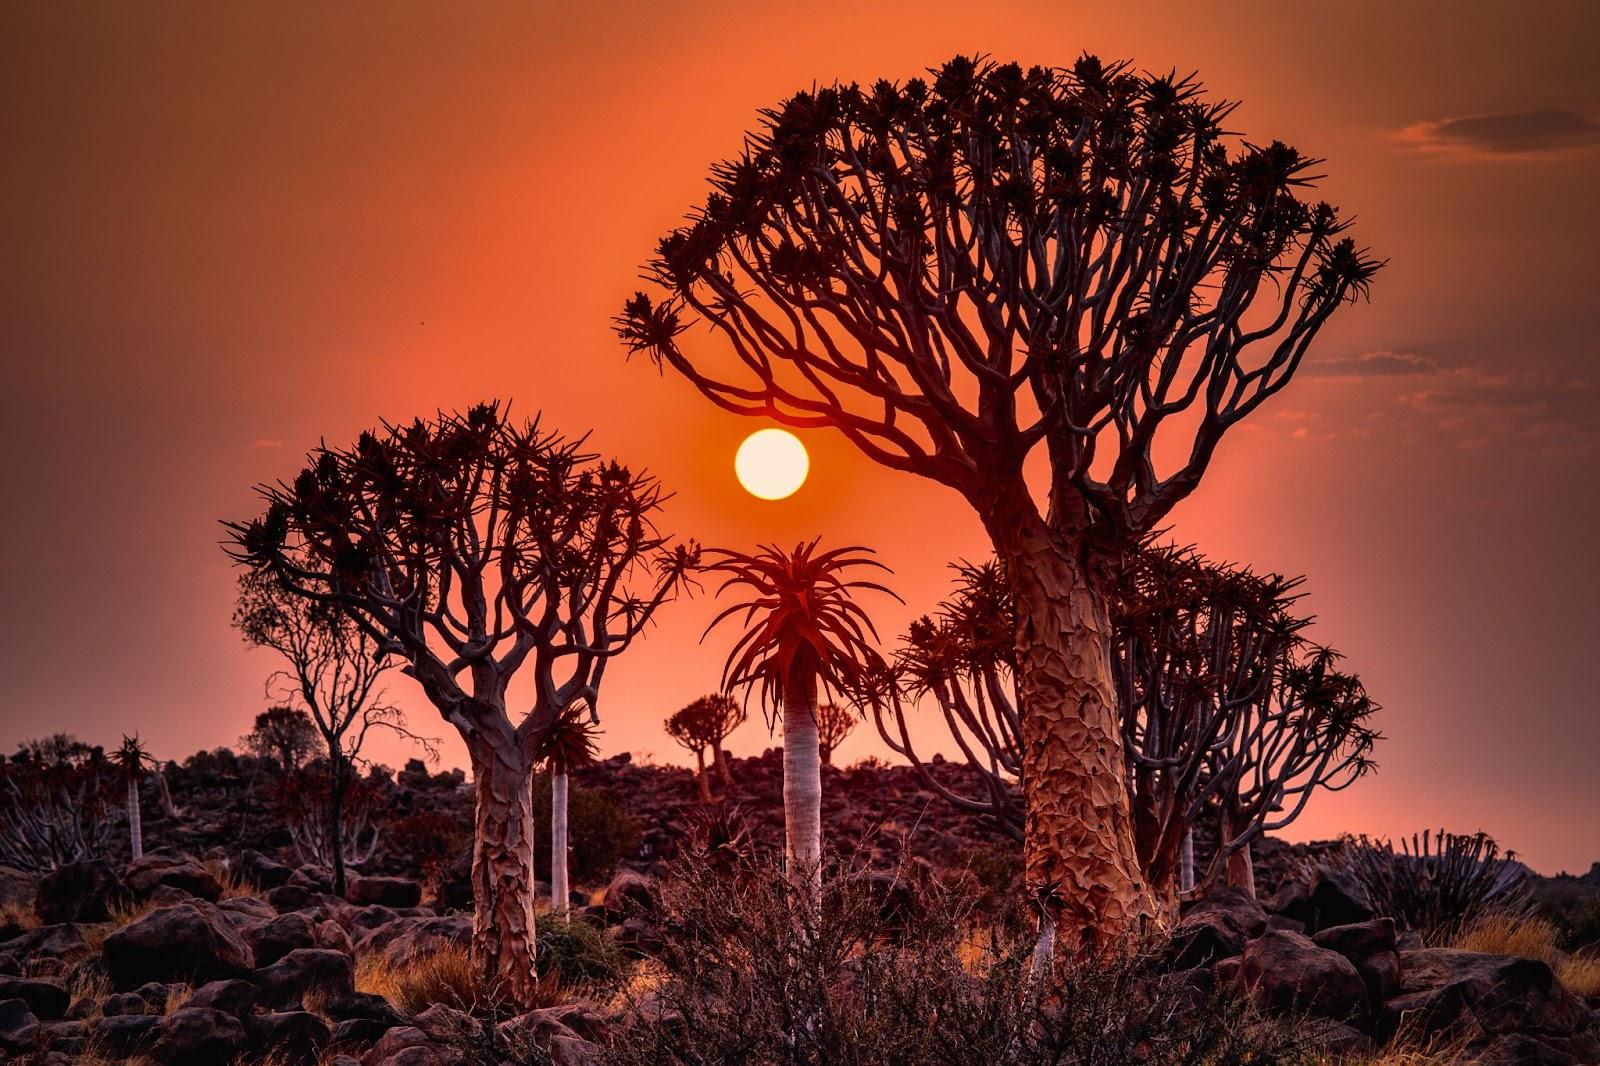 Namibia's unique forest of quiver trees, also known as kokerboom trees